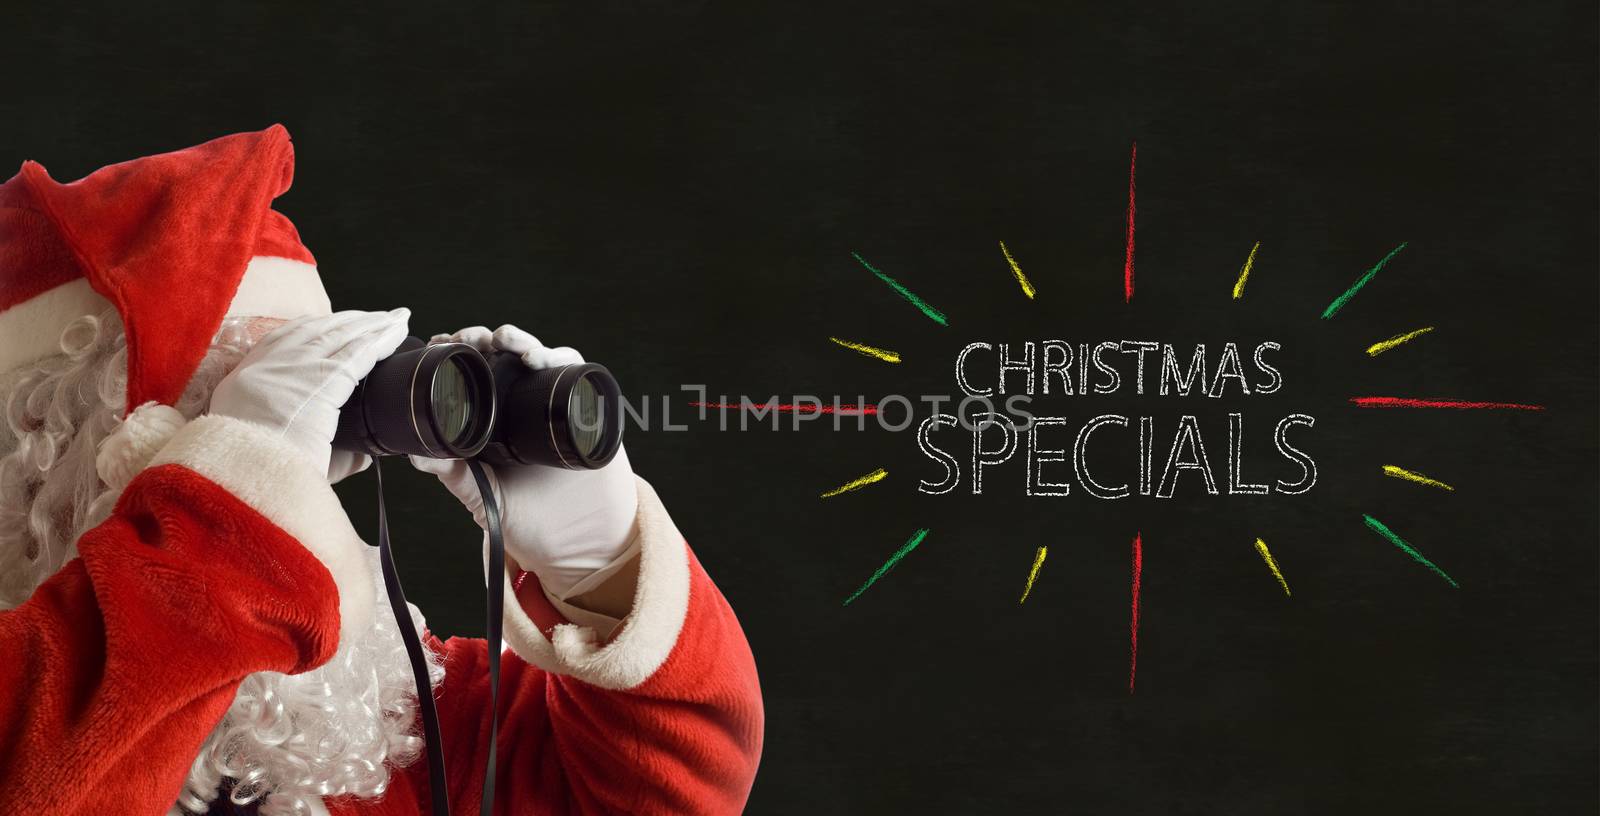 Father Christmas Business Specials Promotion by alistaircotton